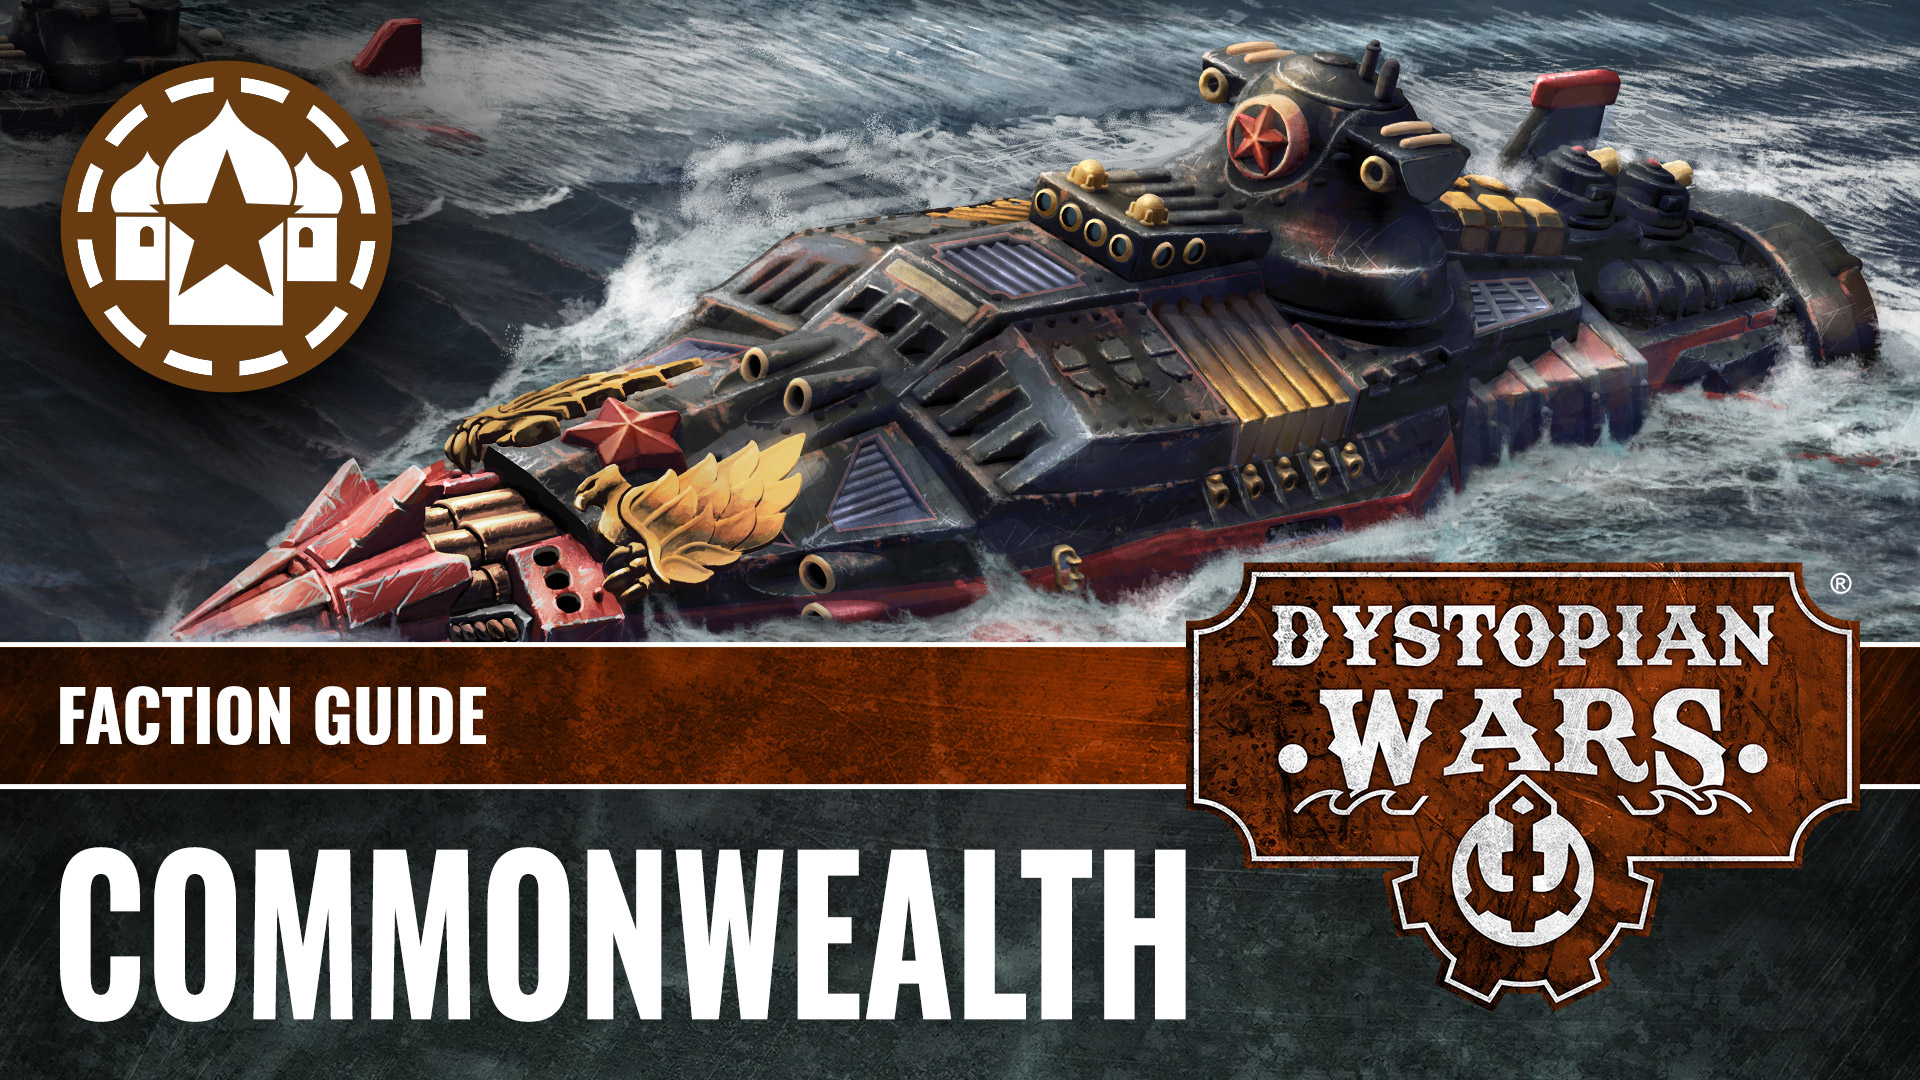 COMMONWEALTH-Lore-Of-Dystopian-Wars-Faction-Guide